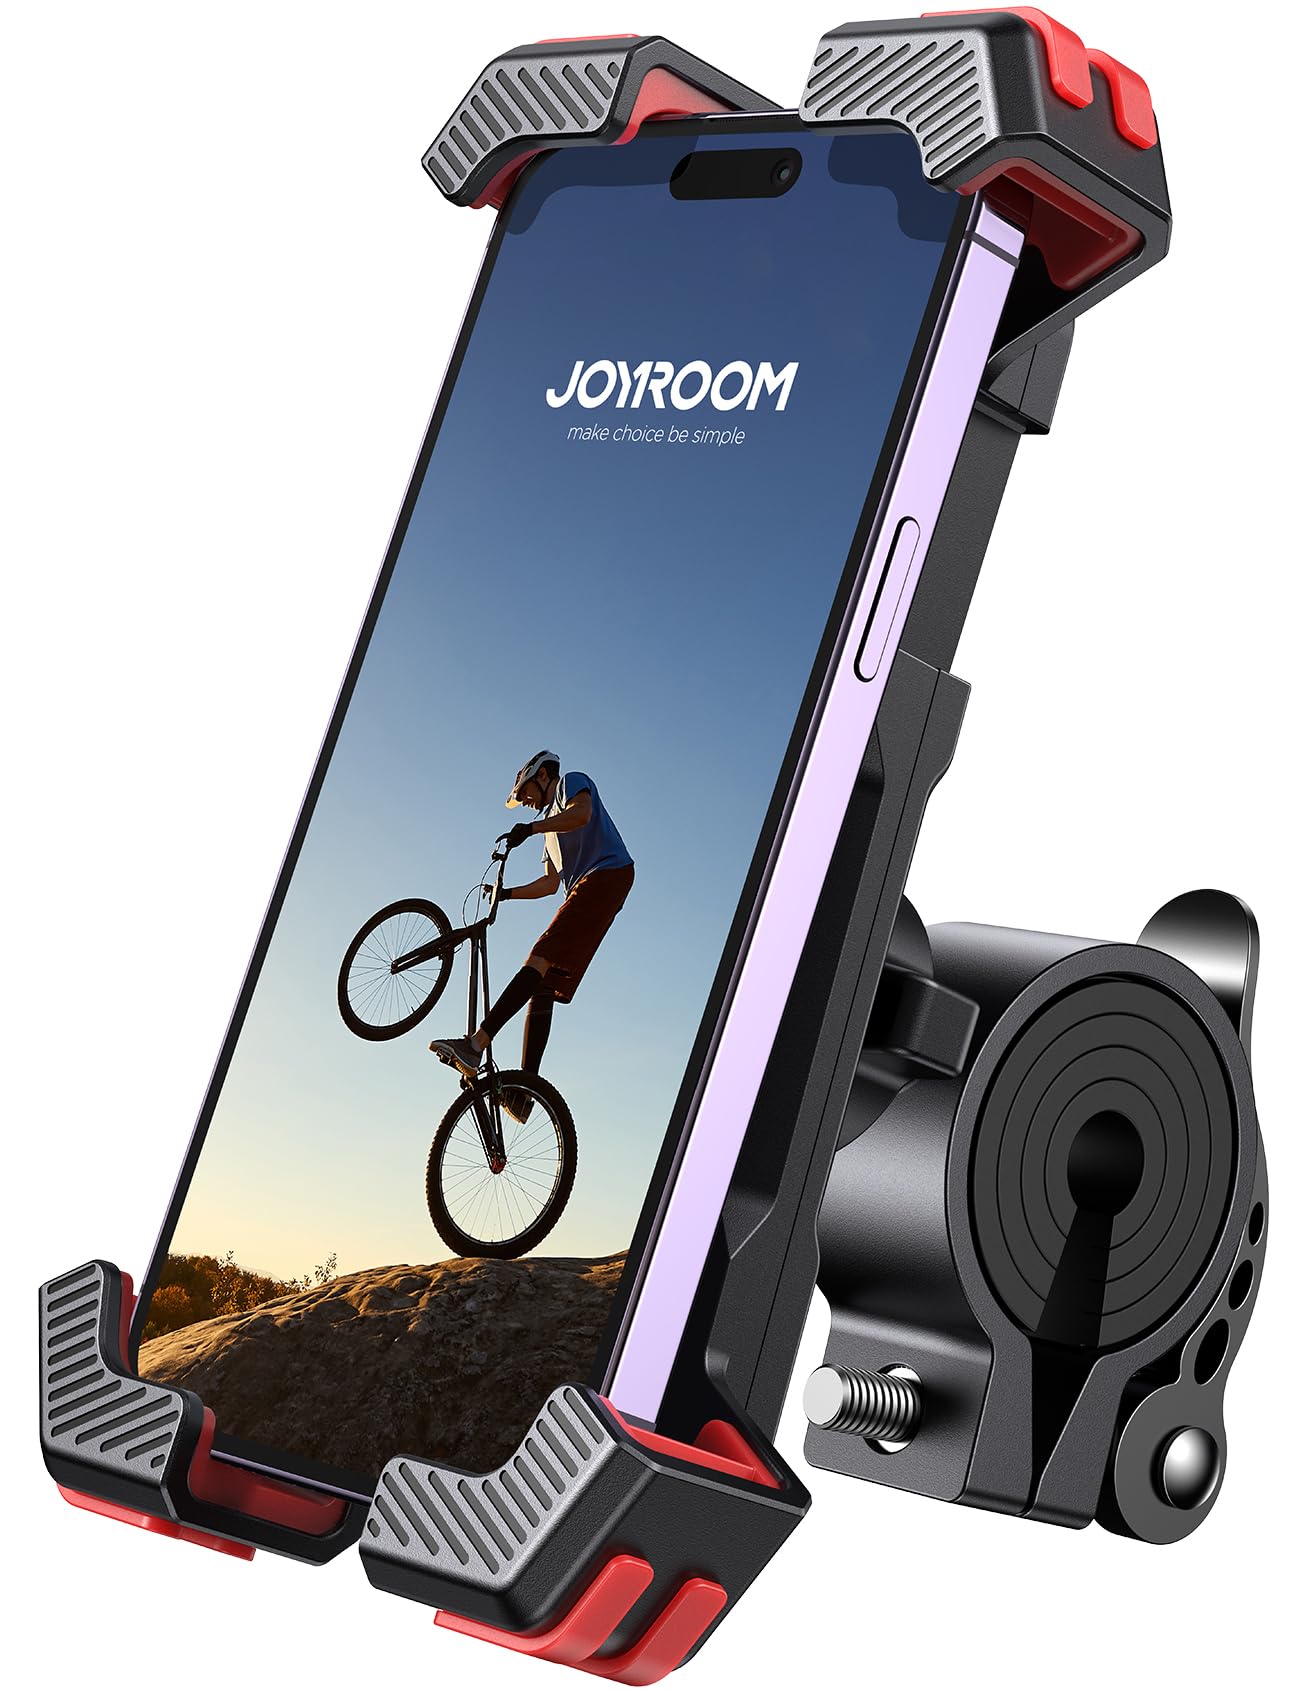 JOYROOM Bike Phone Mount, [1S Locks Phones] Motorcycle Phone Mount with Quick Lock, and Anti-Slip Handlebar Clamp for Bicycle Scooter ATV/UTV, Fit for iPhone 14/13/12 Pro Max and All Phones